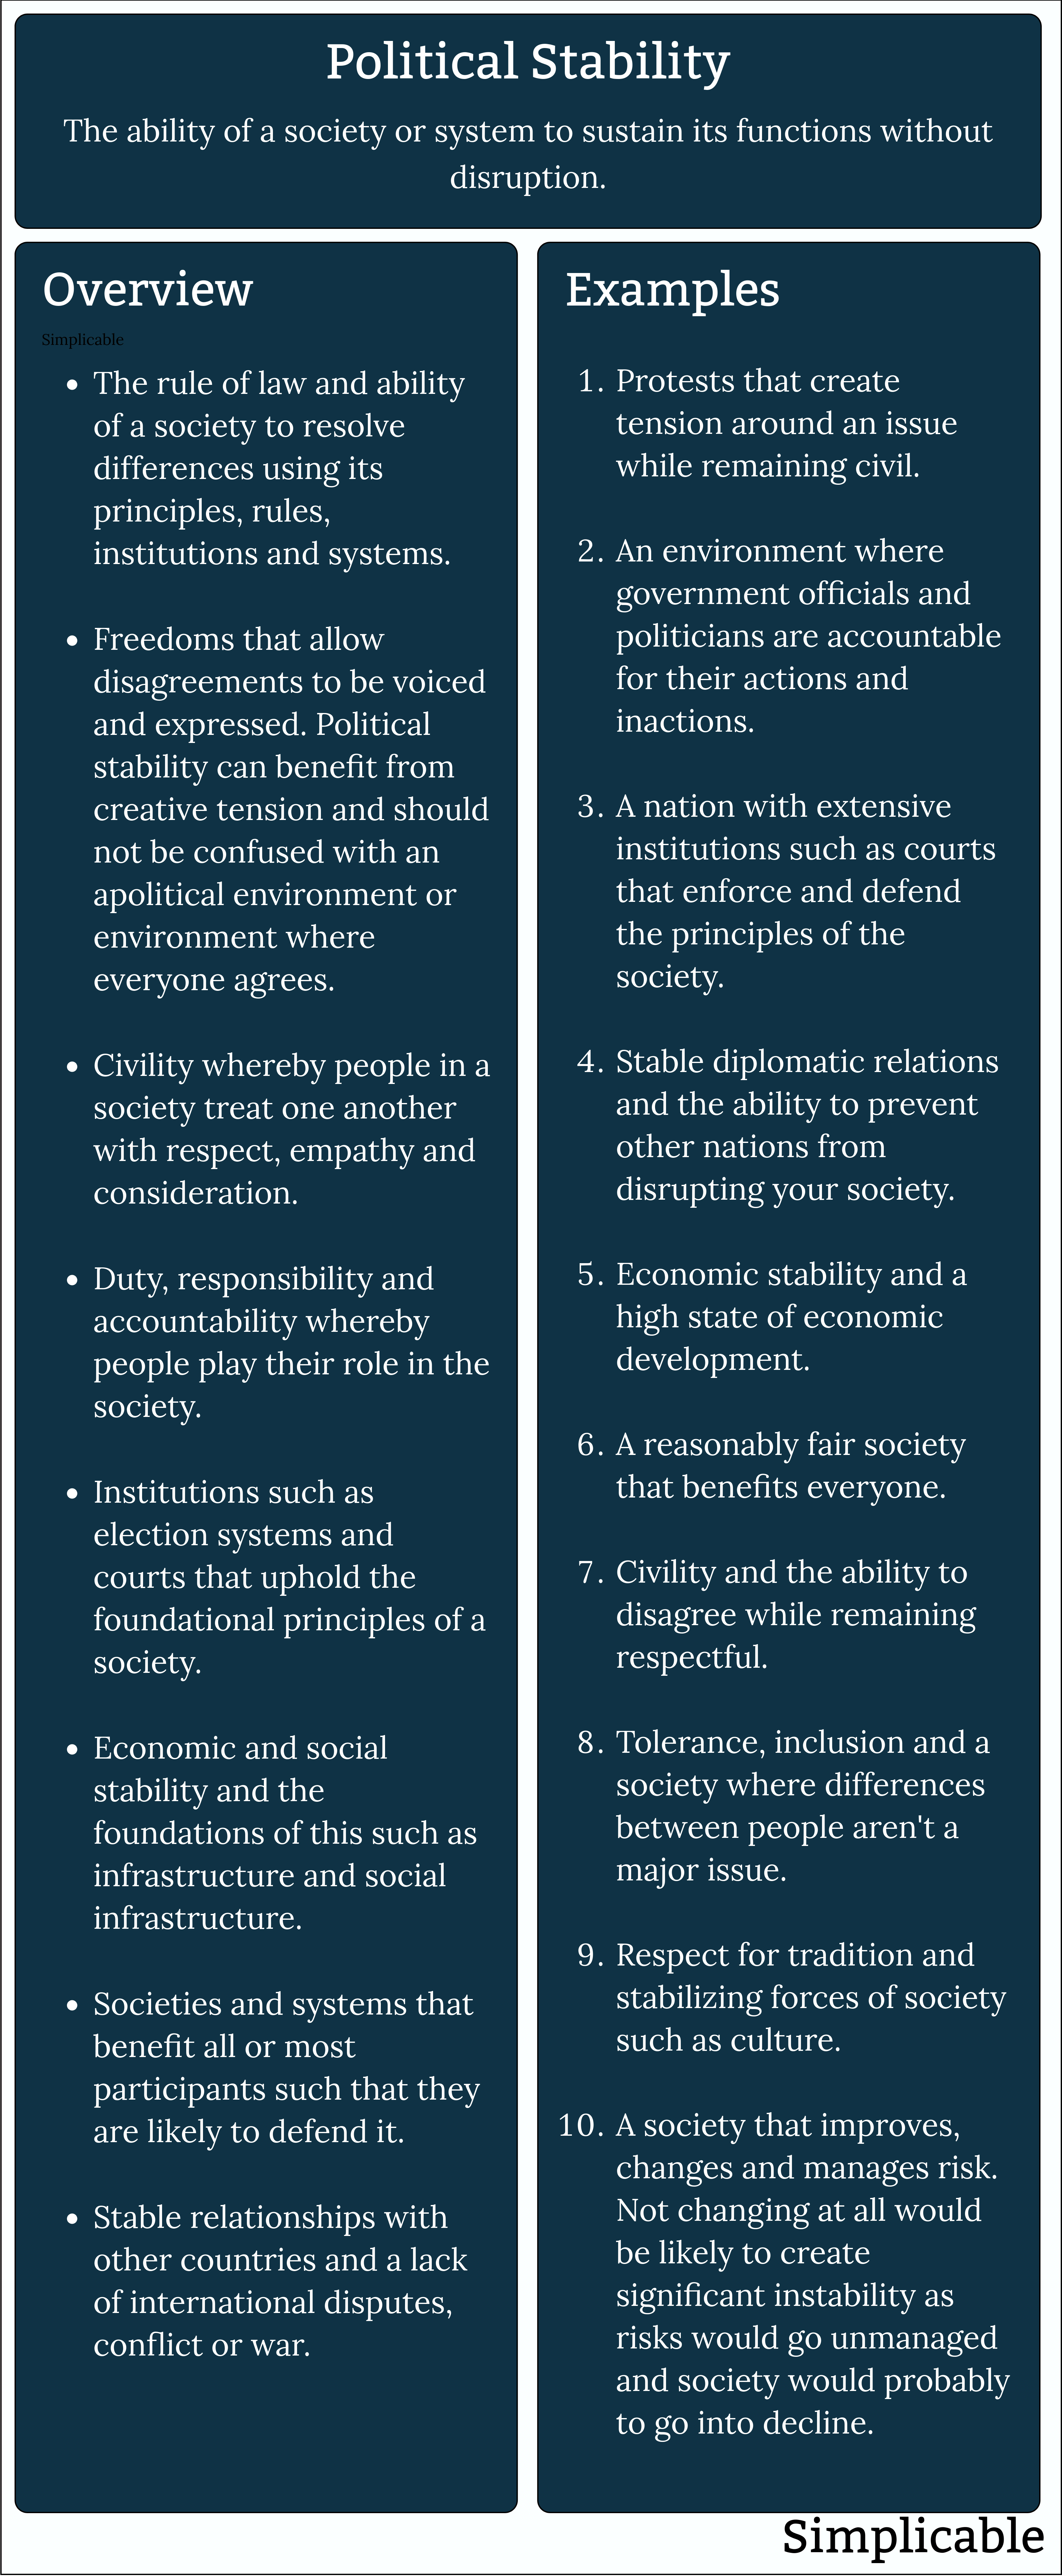 political stability overview and examples